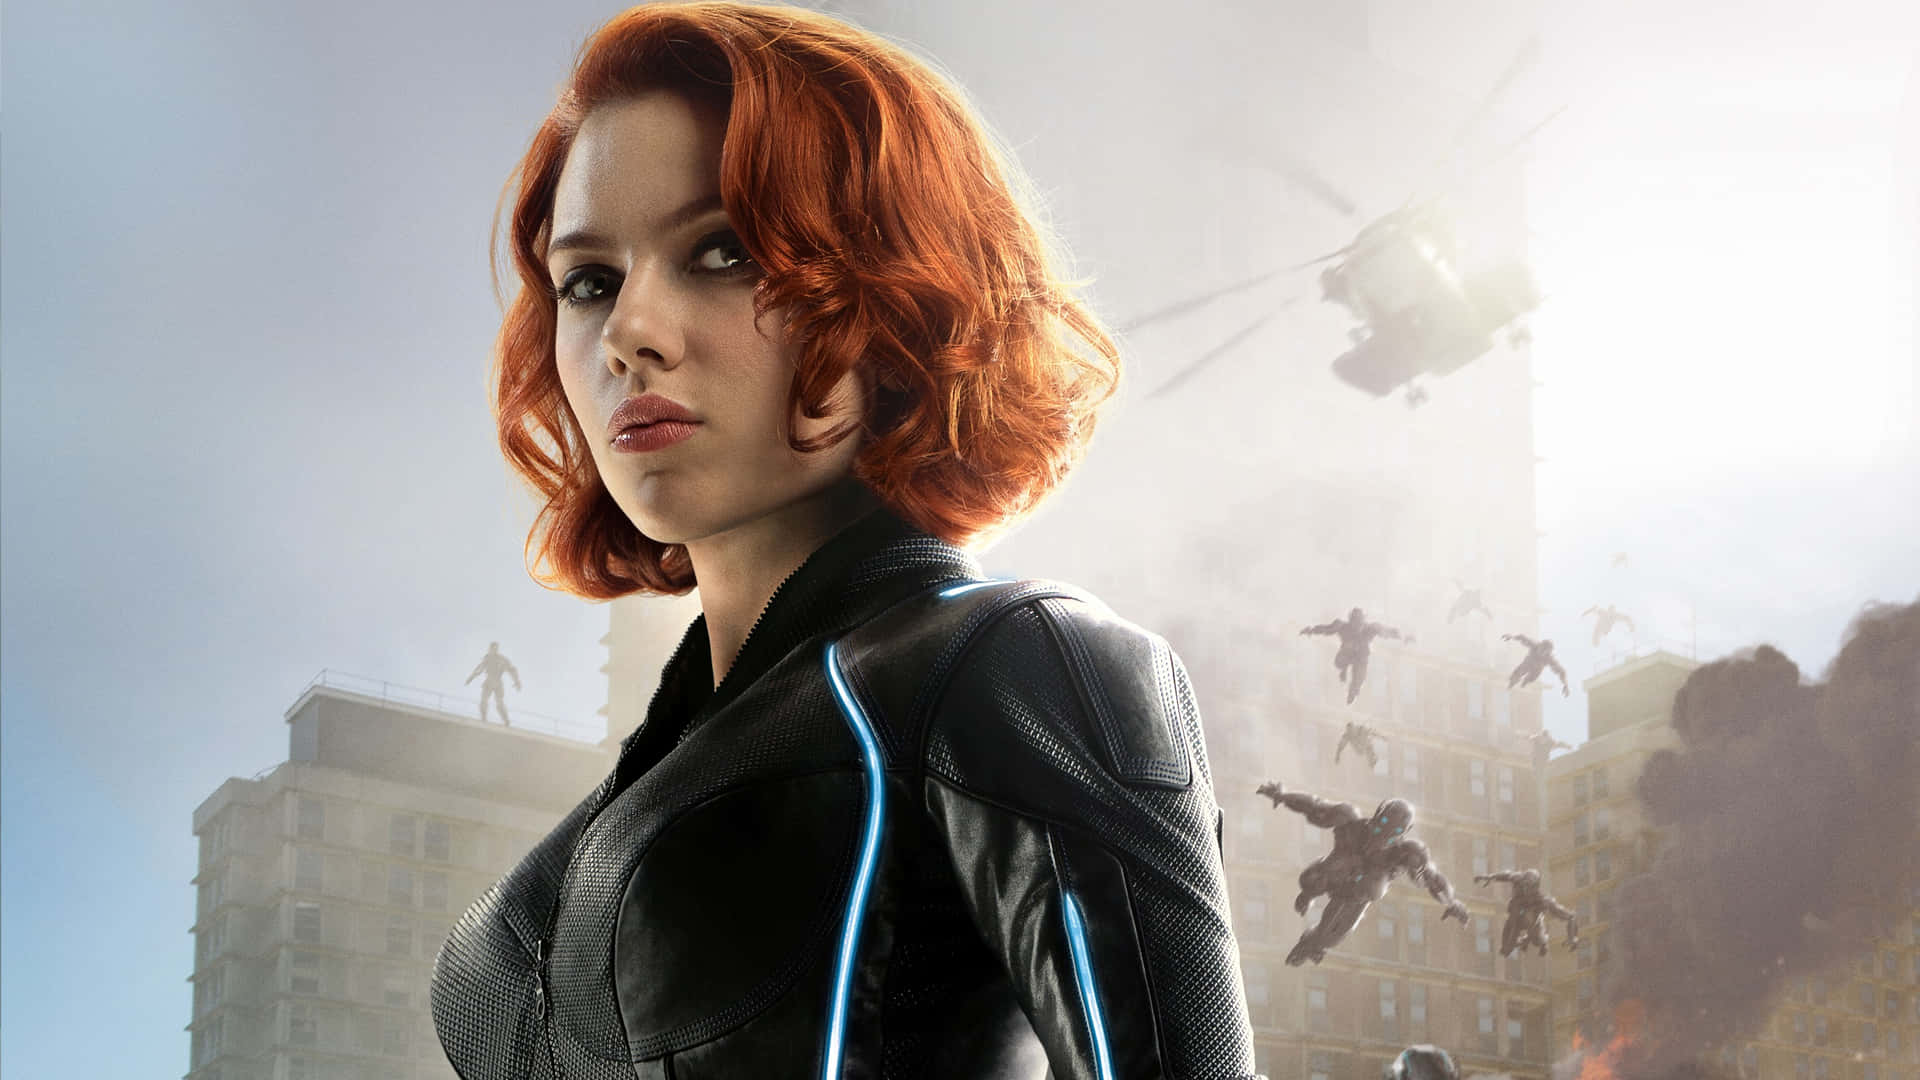 Kick butt and be a superhero with Black Widow